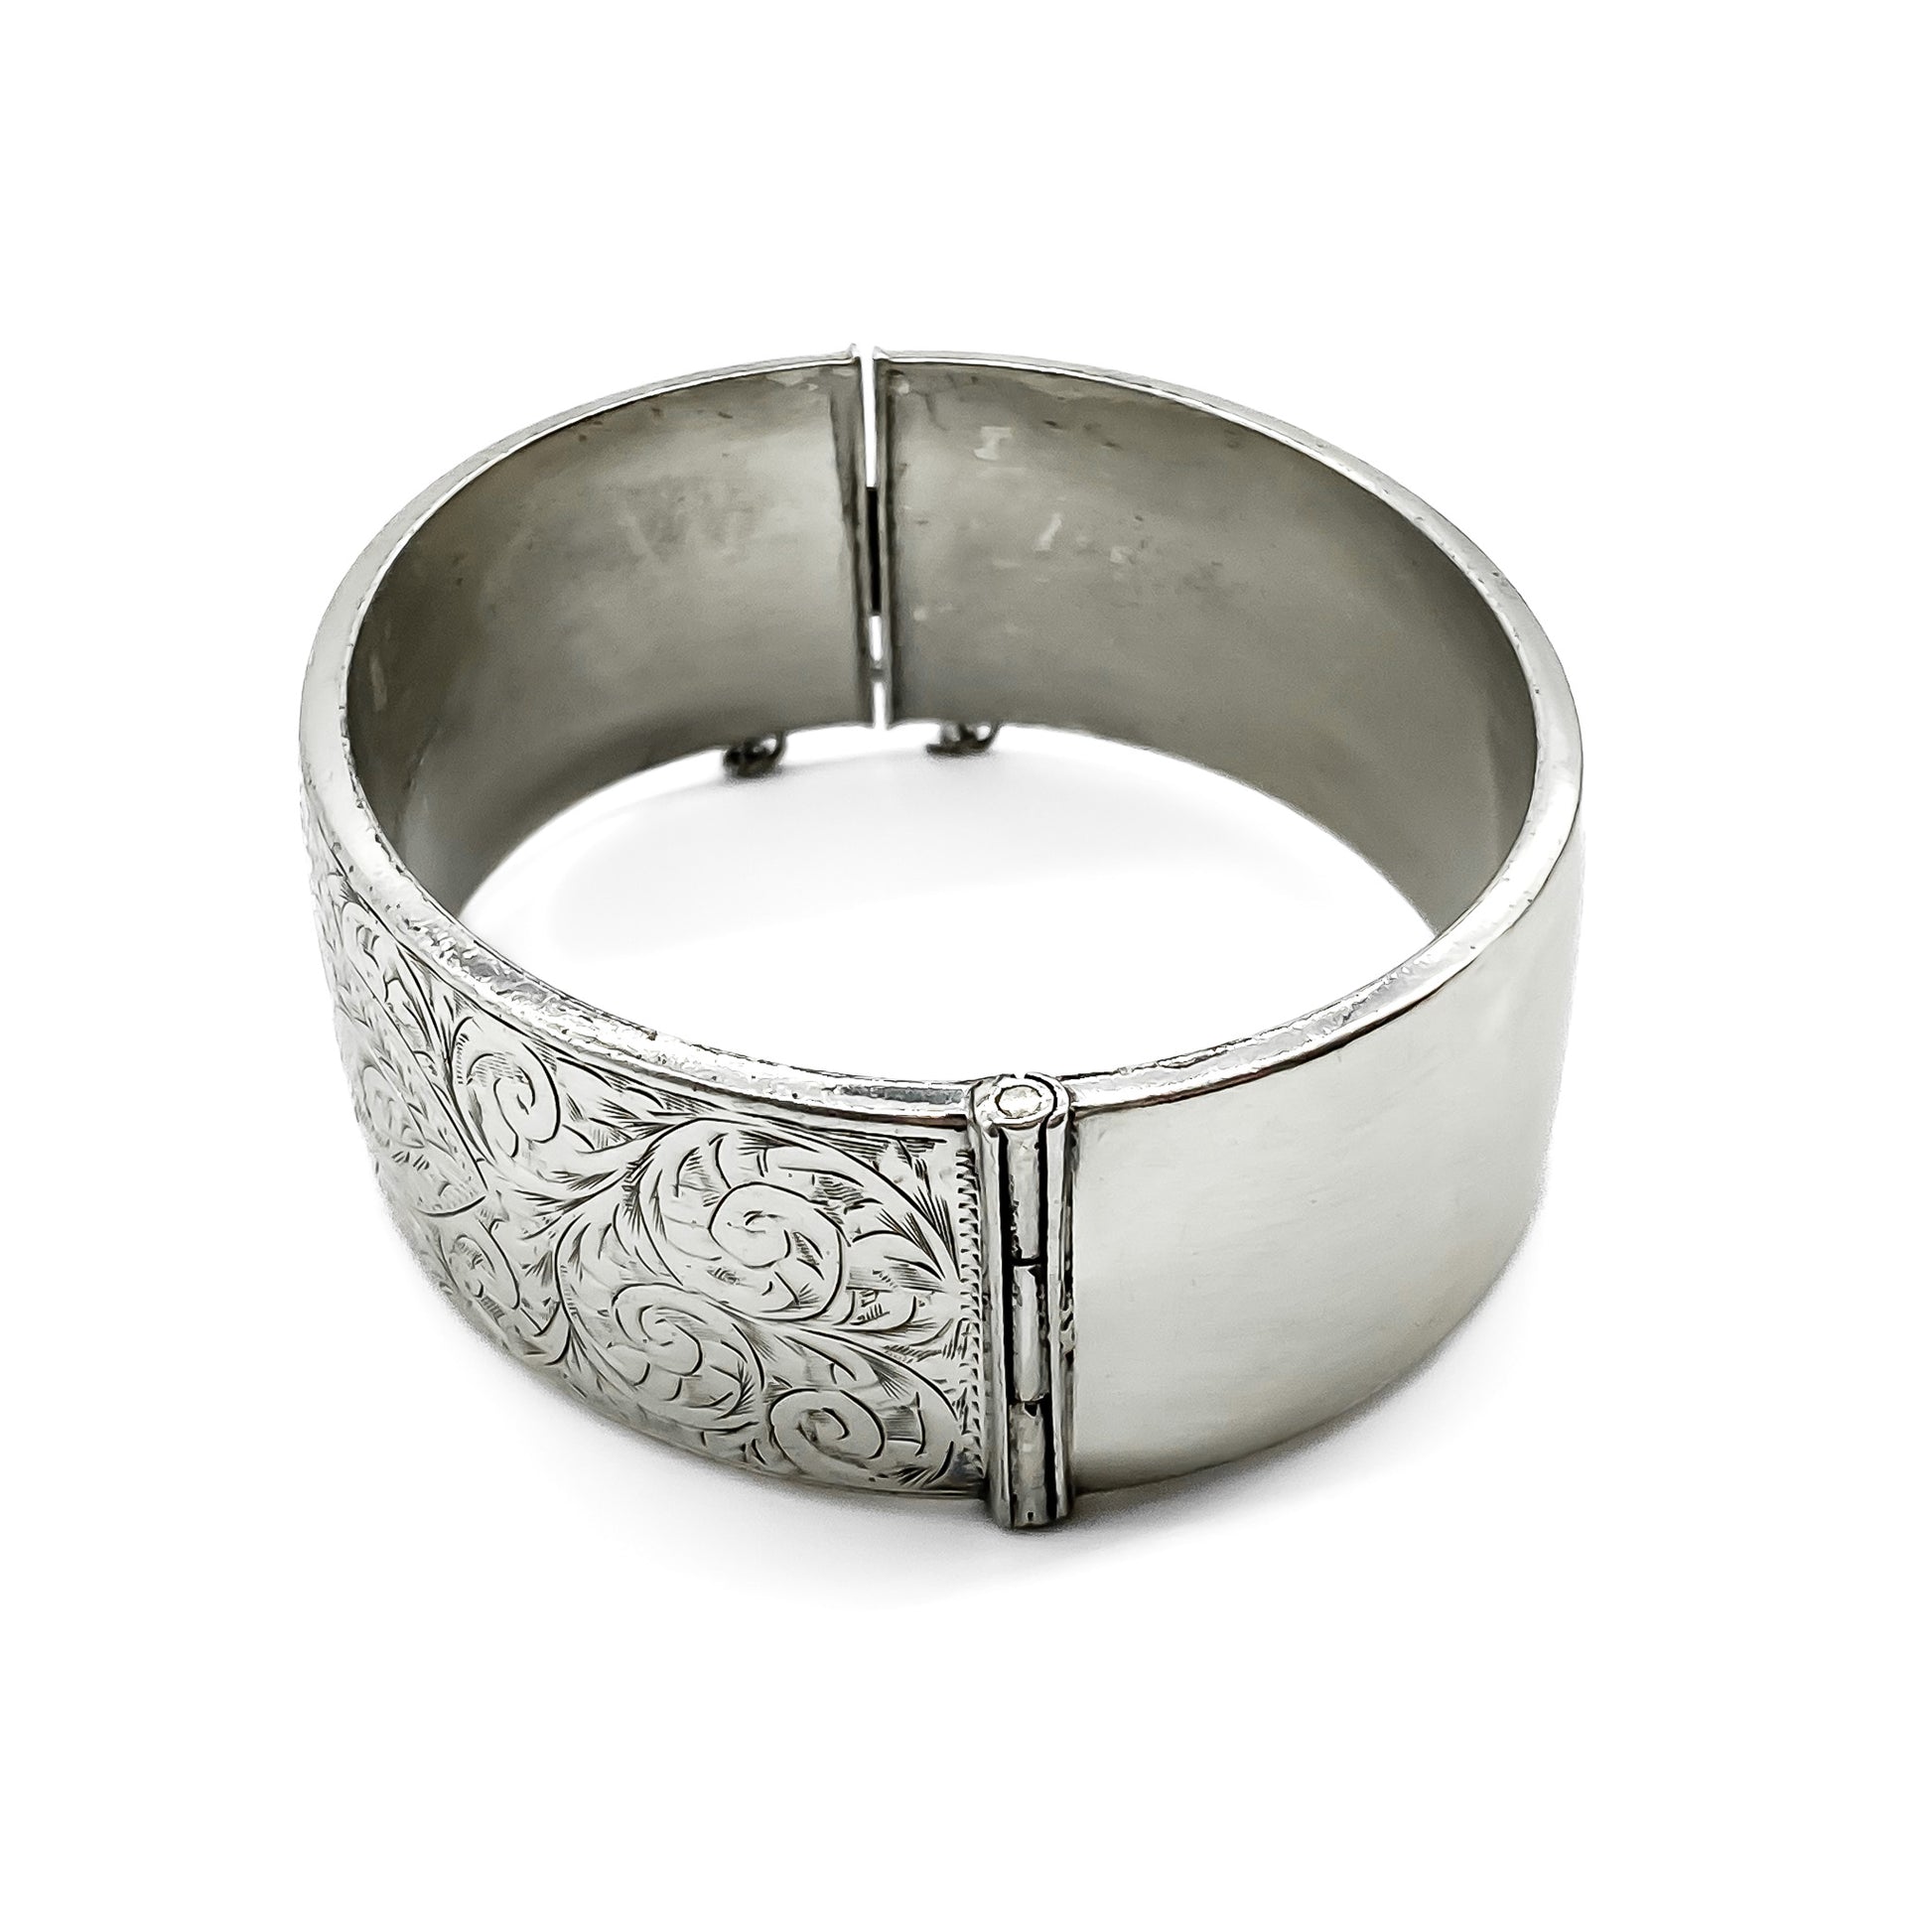 Beautifully engraved sterling silver bangle. Wax filled. Birmingham 1948